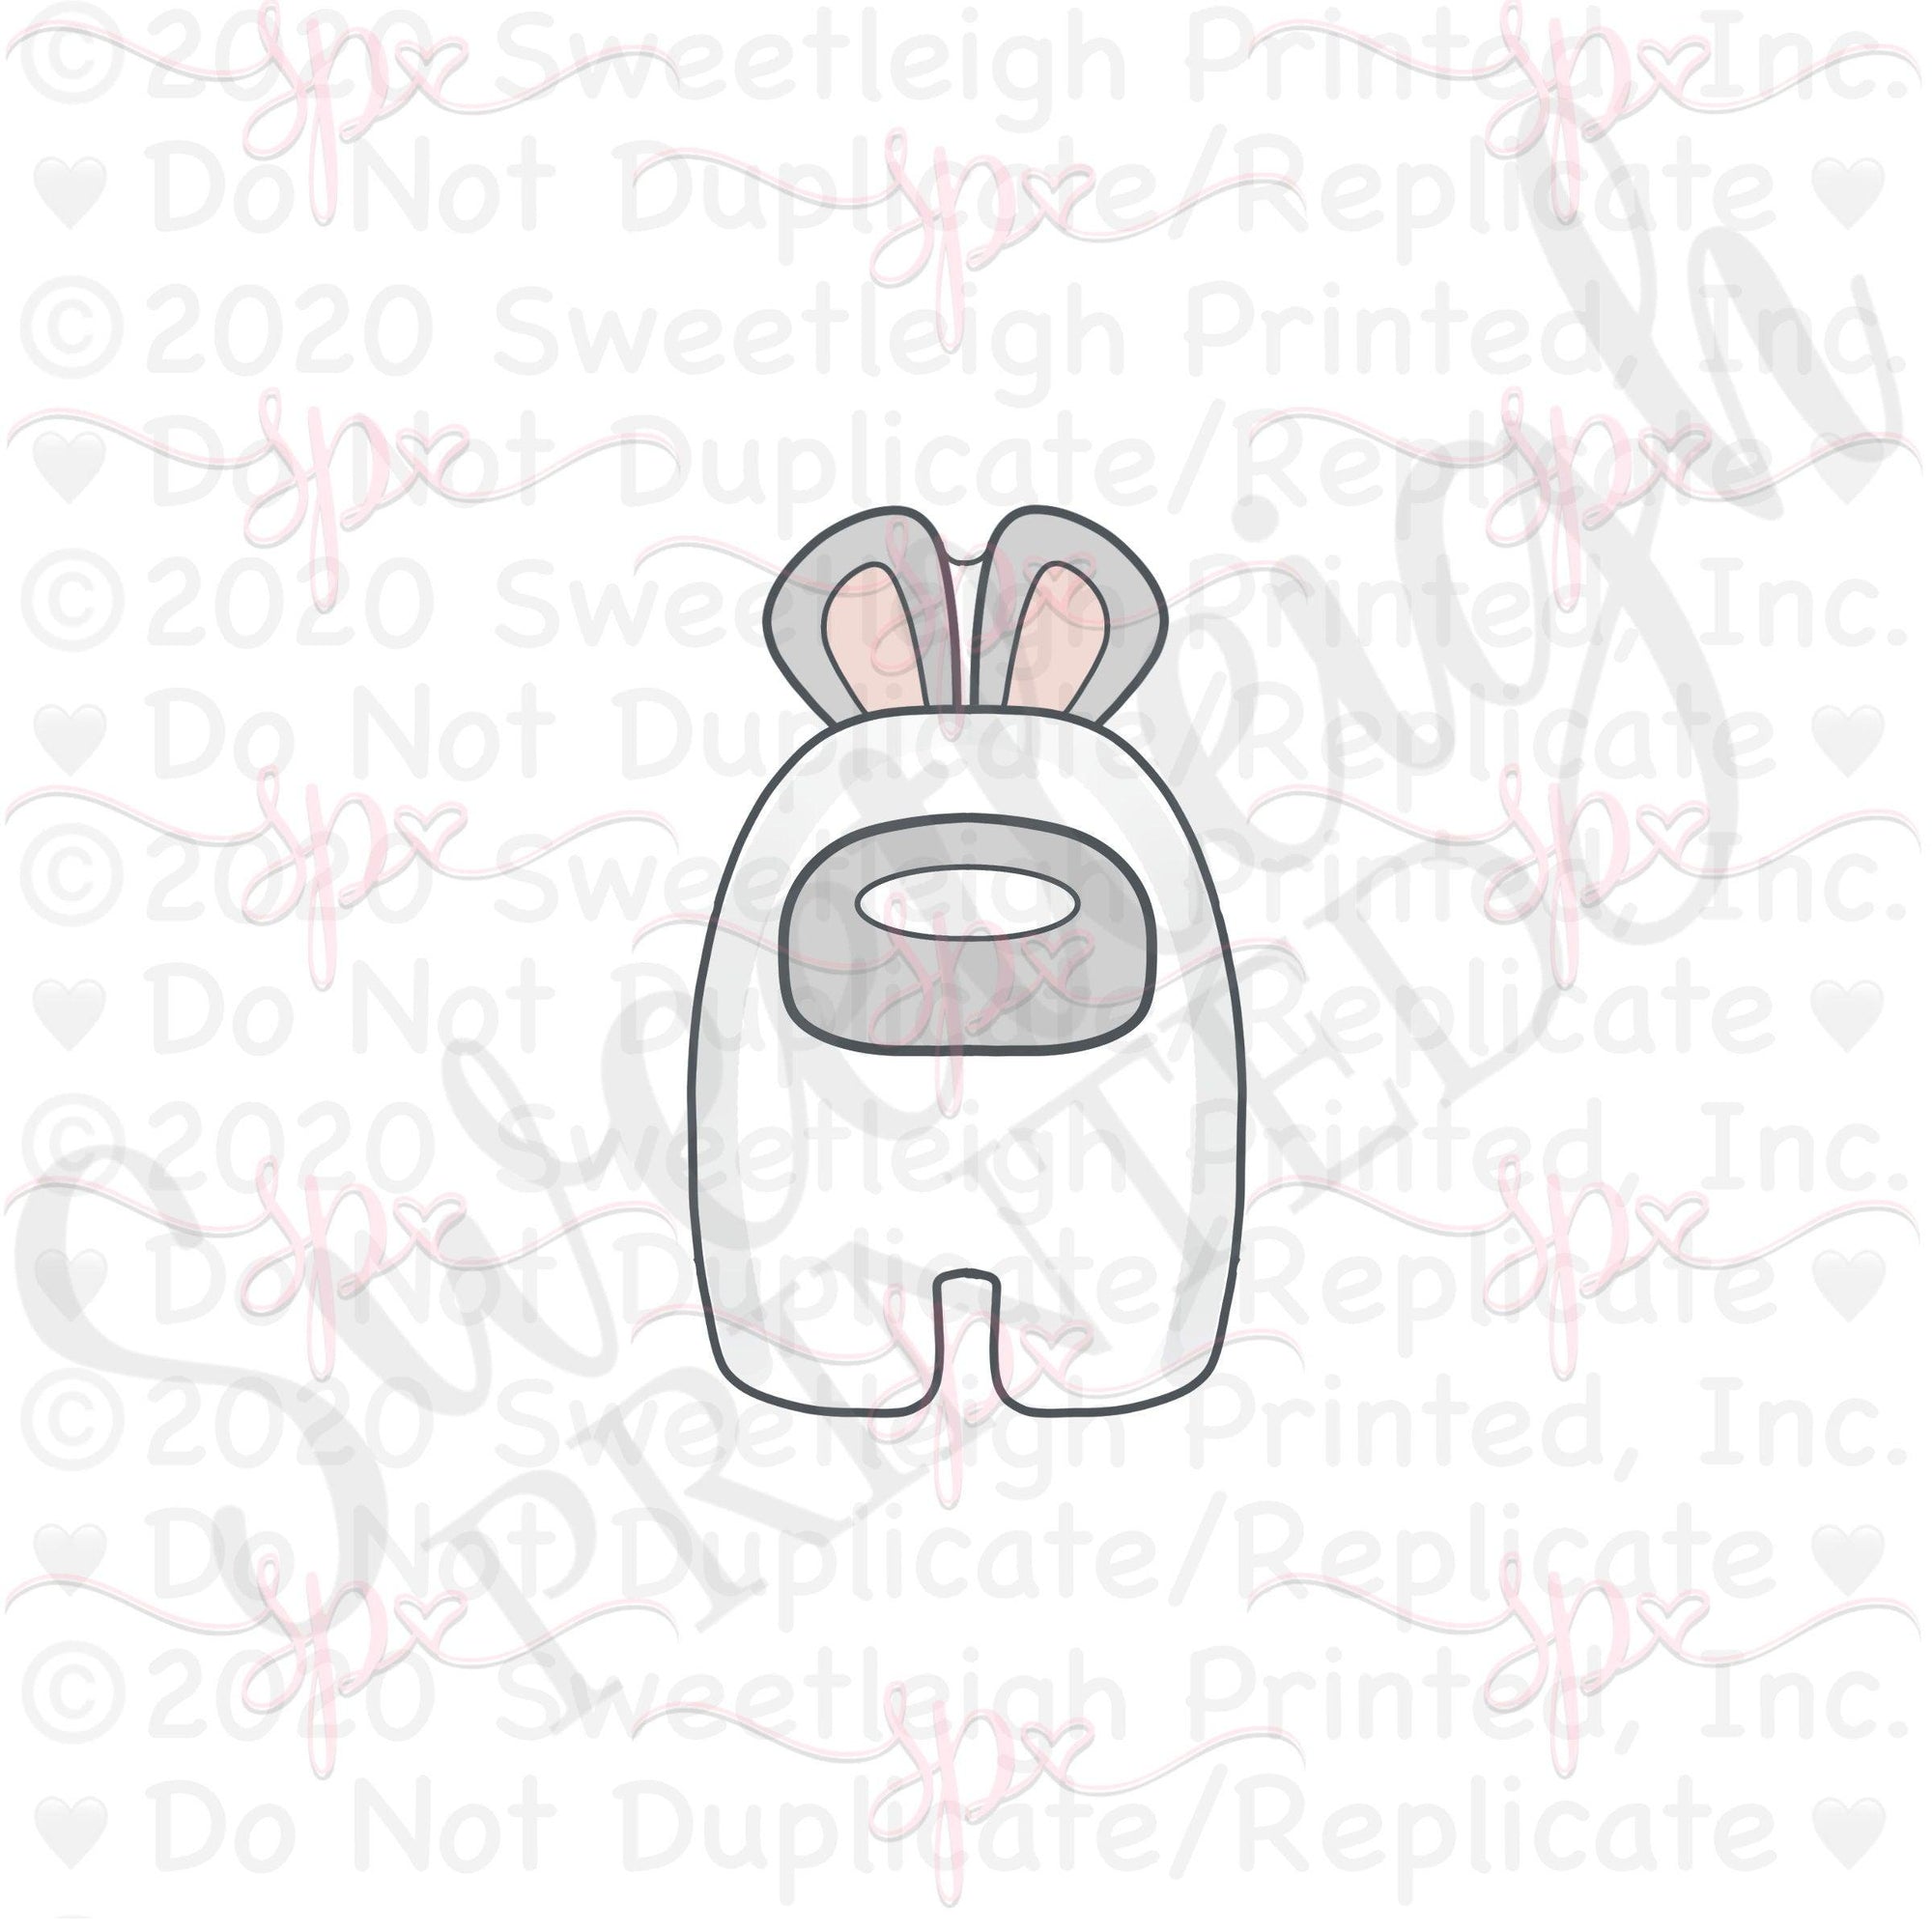 Front Facing Bunny Crew Cookie Cutter - Sweetleigh 